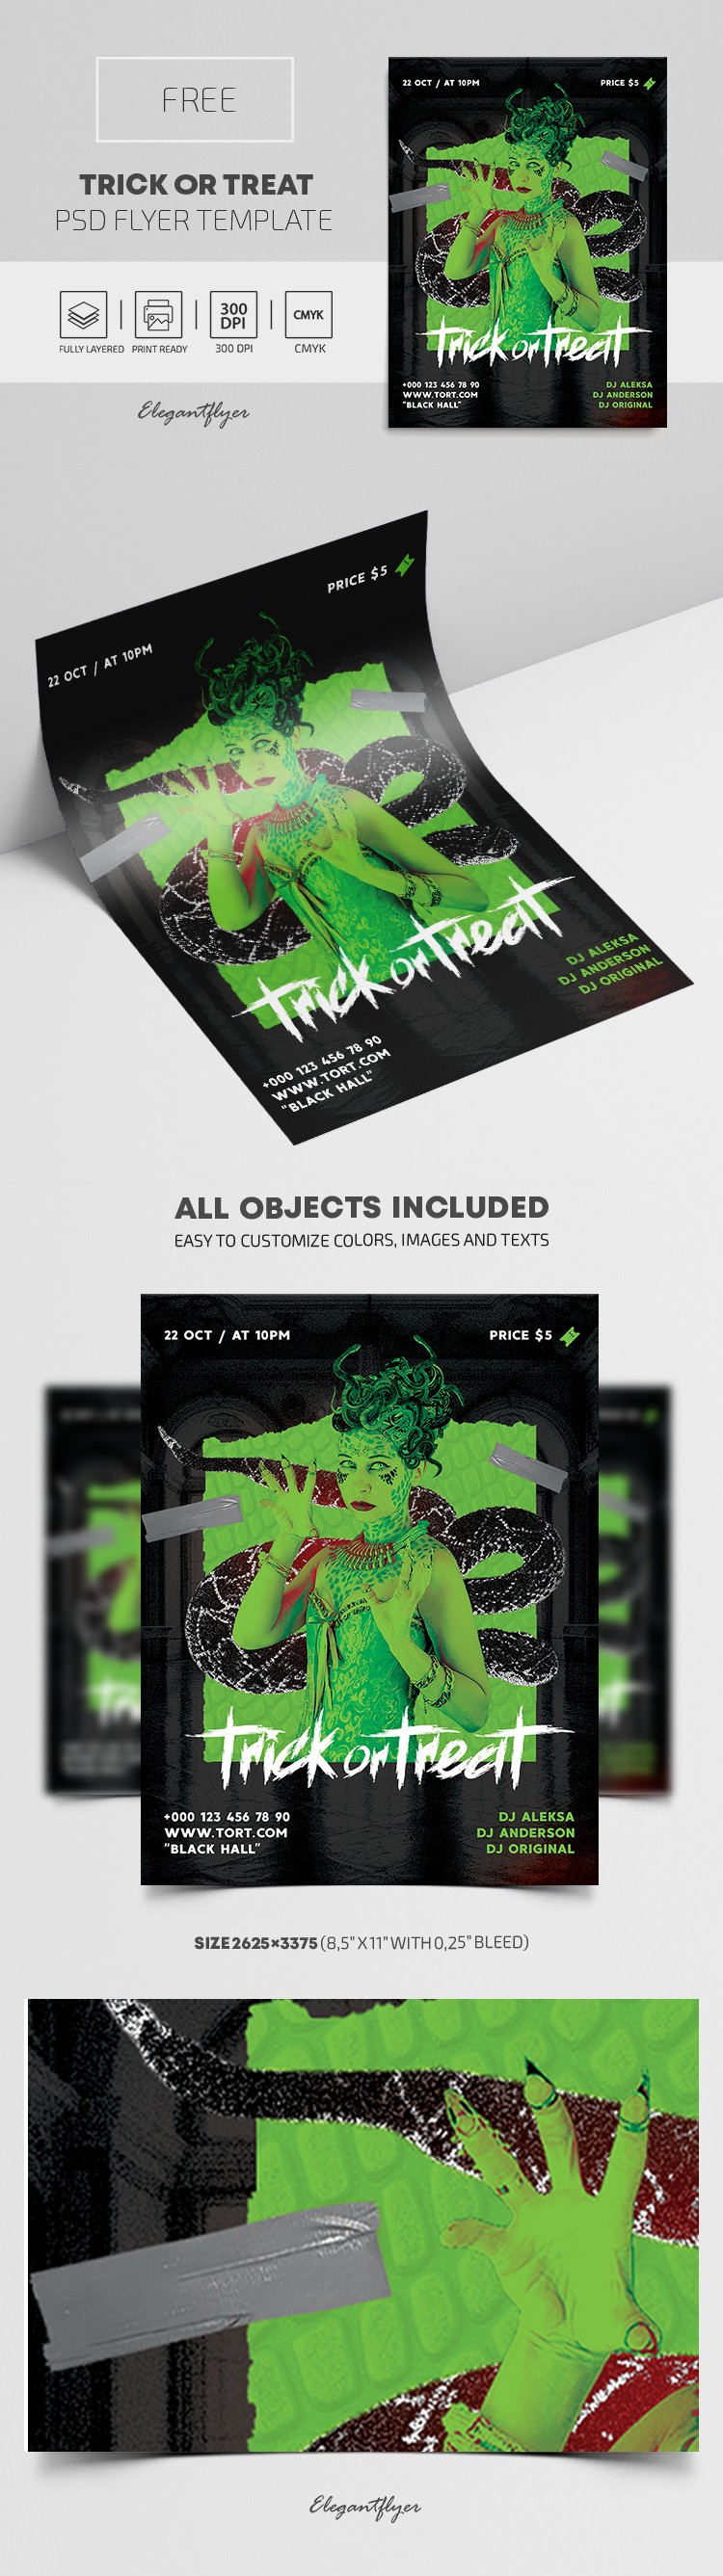 Trick or Treat Flyer would be translated into French as "Tract Trick or Treat". by ElegantFlyer